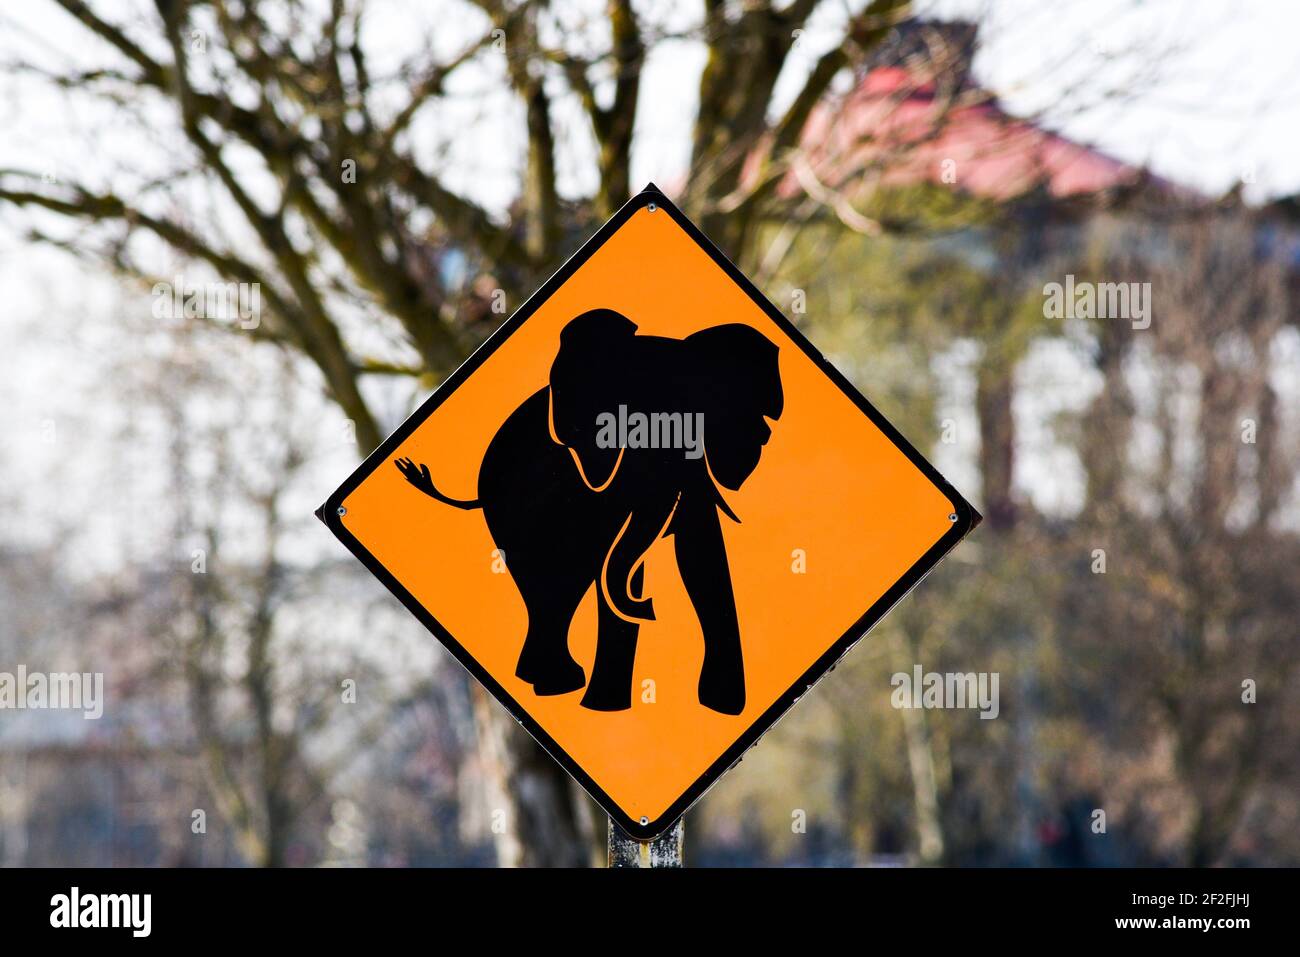 Warning sign talking about an elephant in the street, a tourist attraction of Nantes, France. Stock Photo